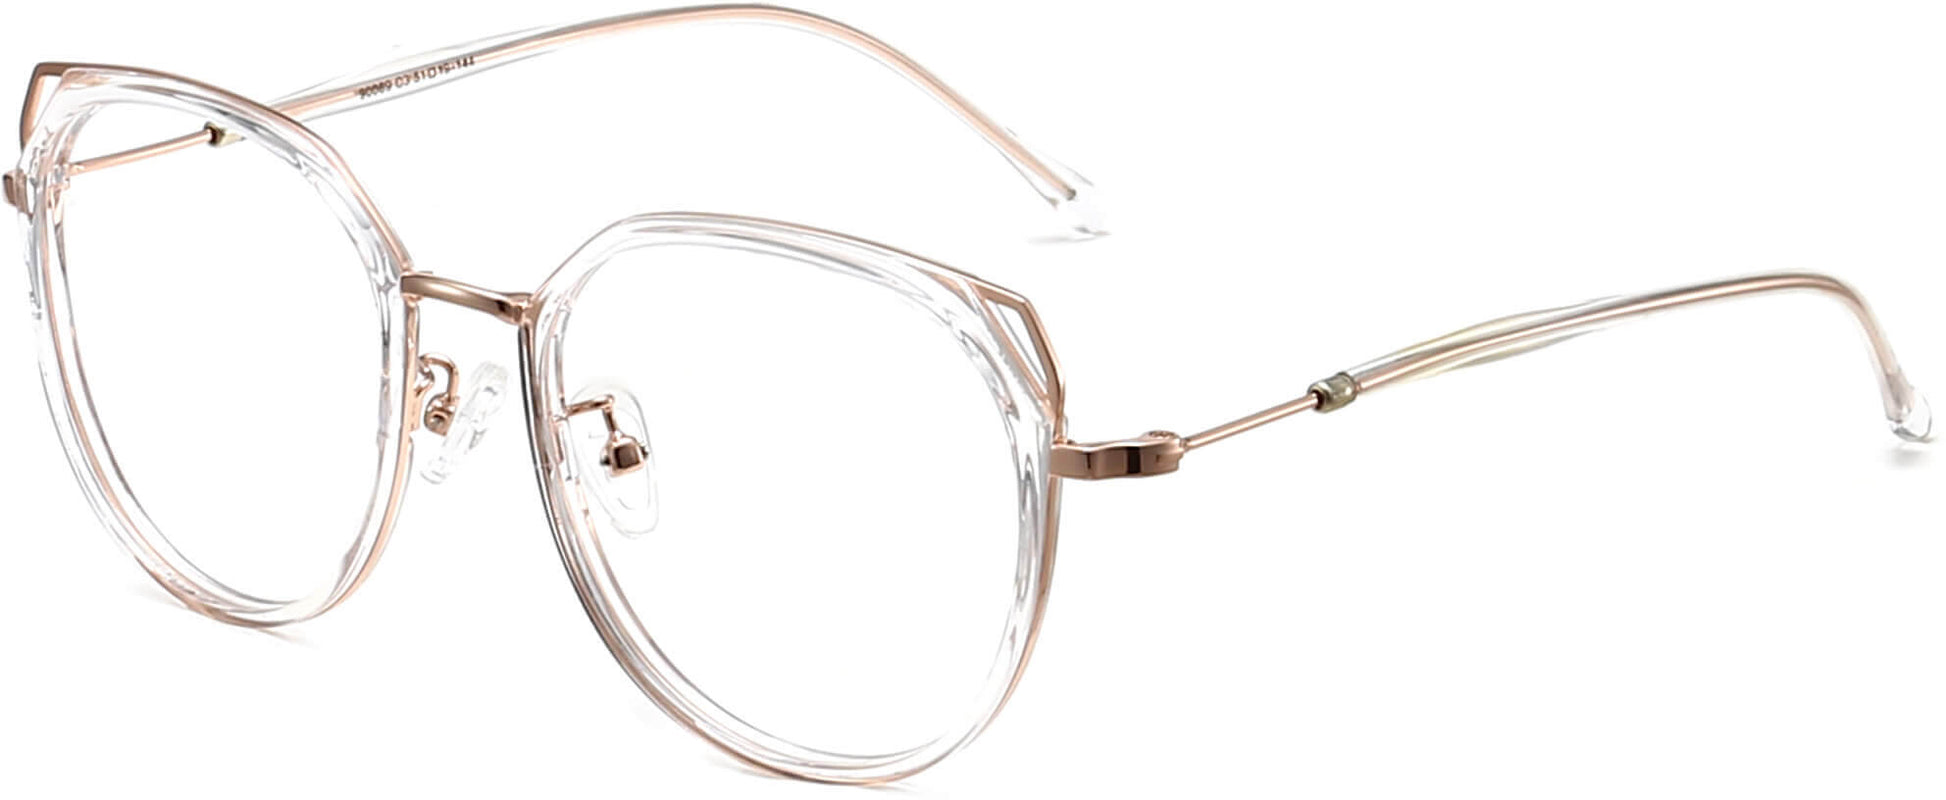 Cynthia Cateye Clear Eyeglasses from ANRRI, angle view